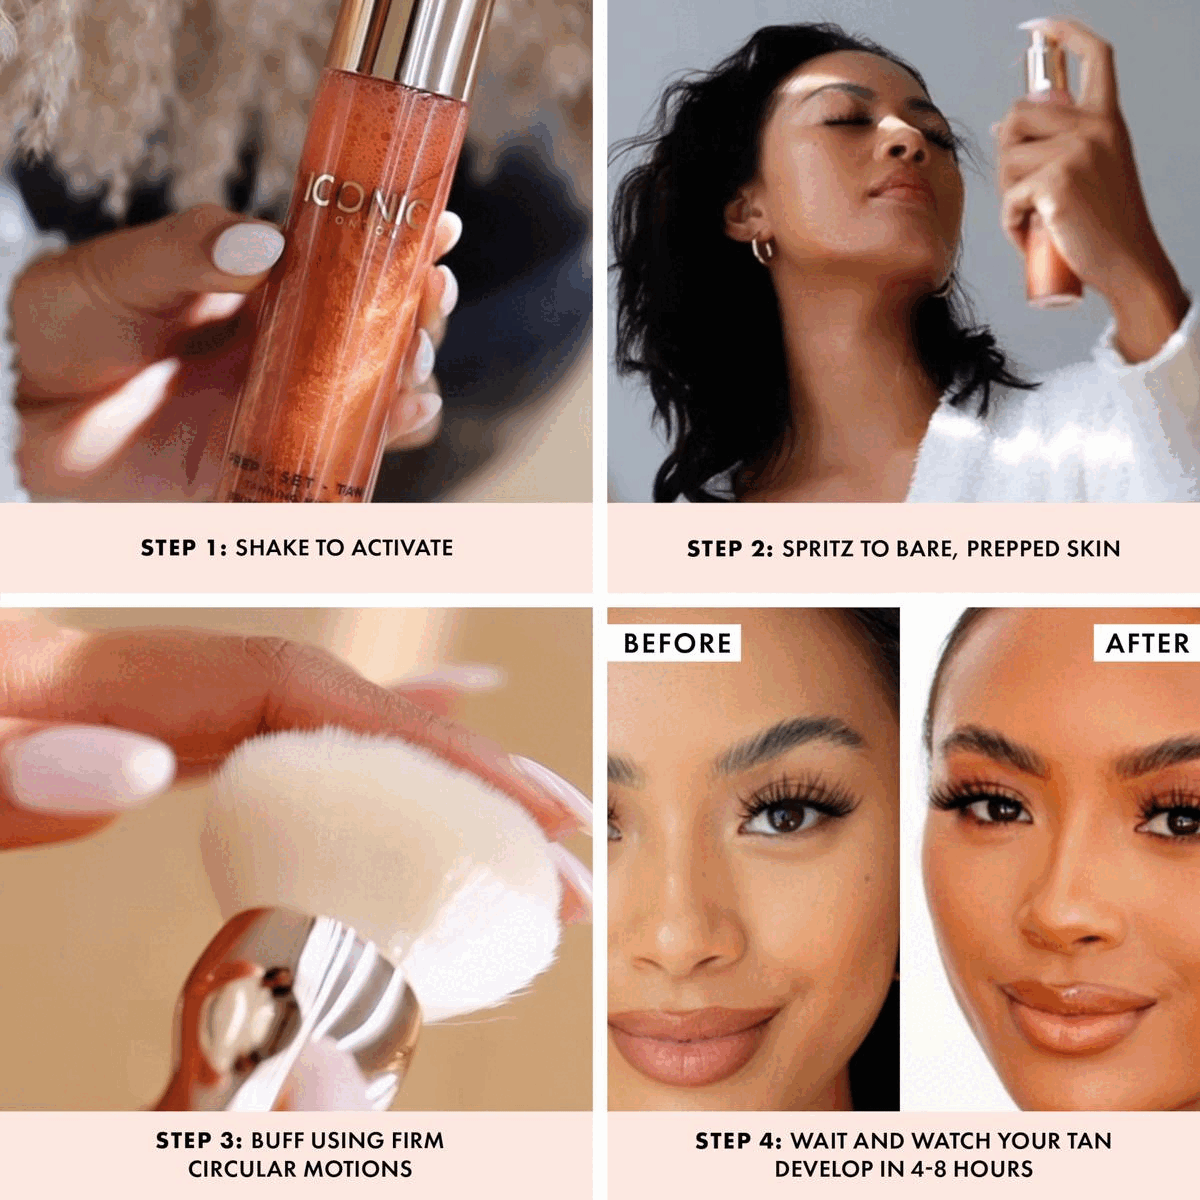 Image 1, shake to activate, spritz on to bare prepped skin, buff using firm circular motions, tan develops in 4-8 hours, Image 2, Before and After Model wears prep-set-tan in glow Image 3, Before and After Jonah wears prep-set-tan in glow, Image 4, Anya wears prep-set-tan in glow Image 5, Group model picture showing the product being worn, from left to right, Sara wears prep-set-tan in original, Lucy wears prep-set-tan in original, Jonah wears prep-set-tan in glow, Anya weras prep-set-tan in glow